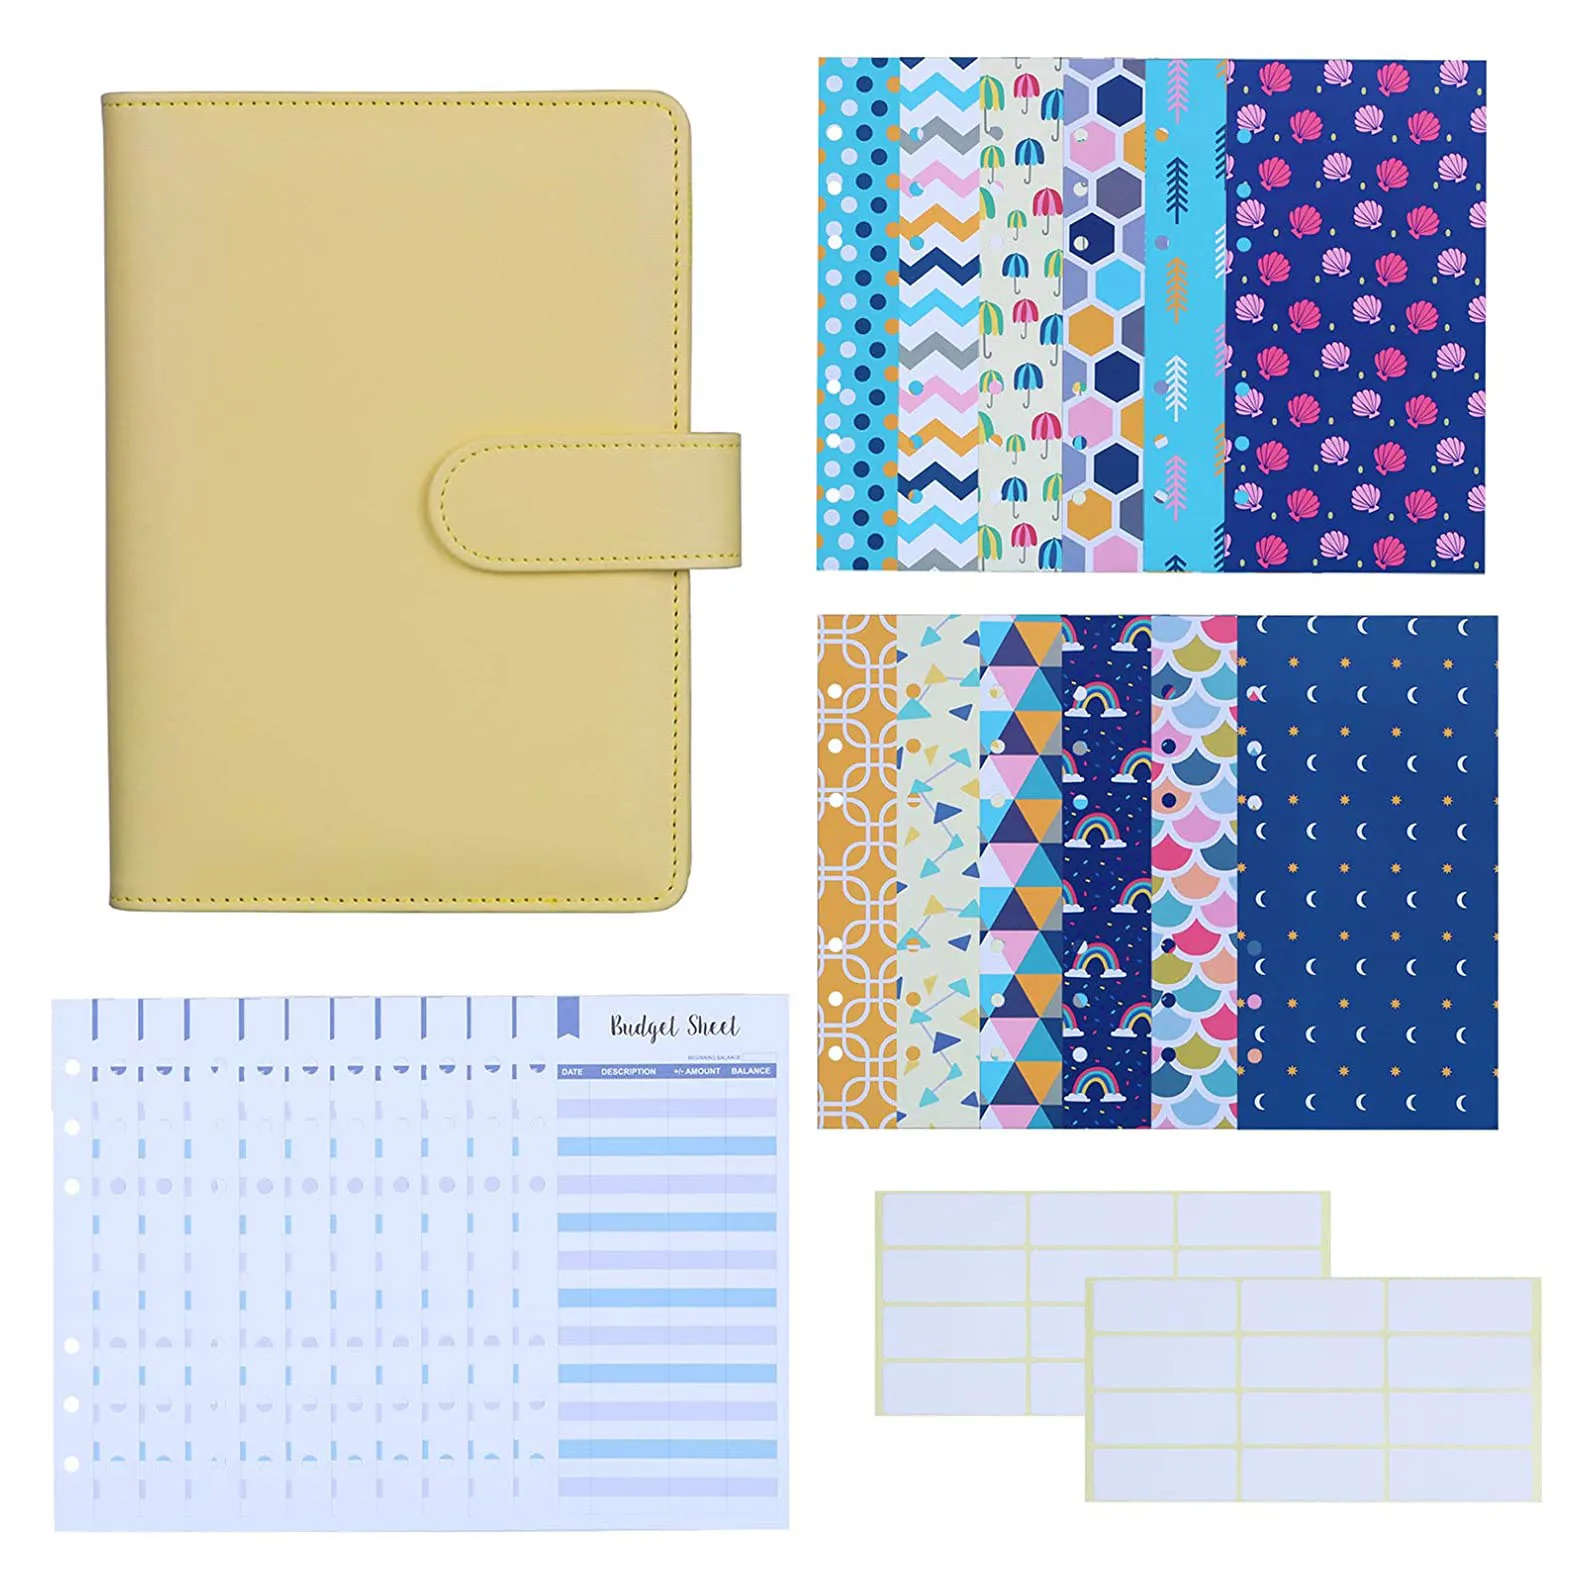 

A6 PU Leather Binder Budget Envelopes System Organizer, Budget Cash Envelopes, Expense Budget Sheets and Labels for Bill Planner